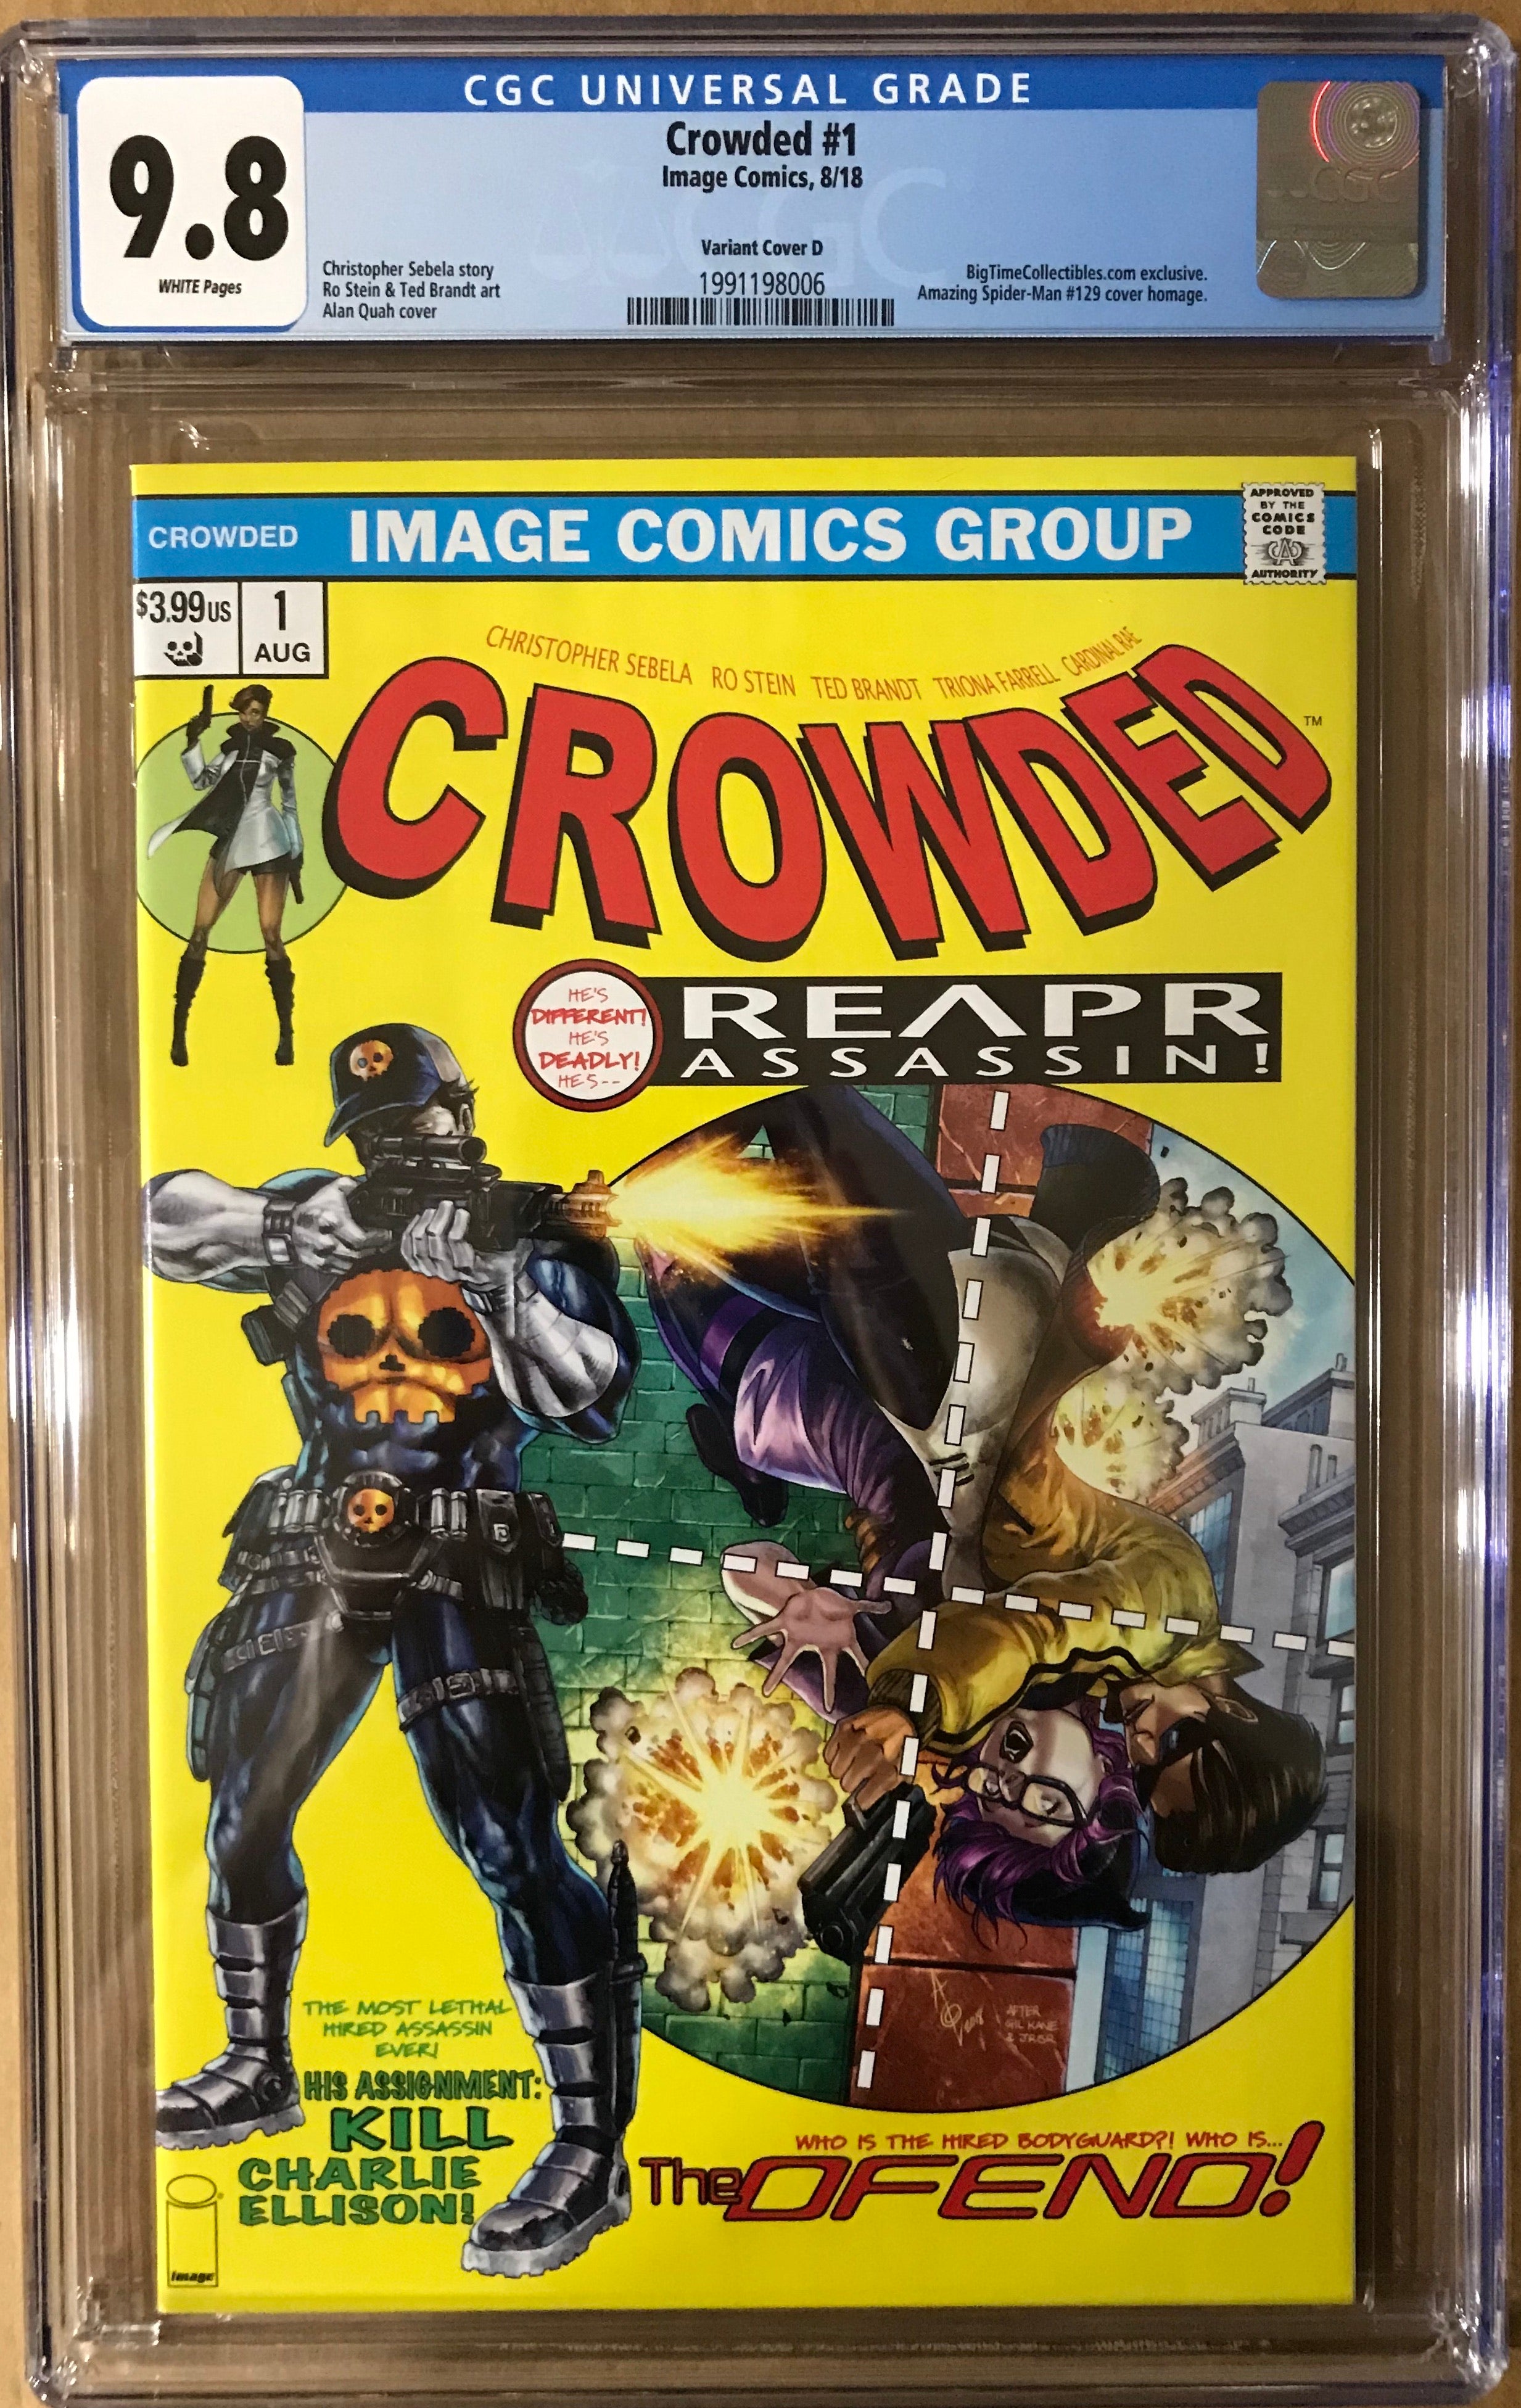 CROWDED #1 ALAN QUAH EXCLUSIVE HOMAGE CGC 9.8